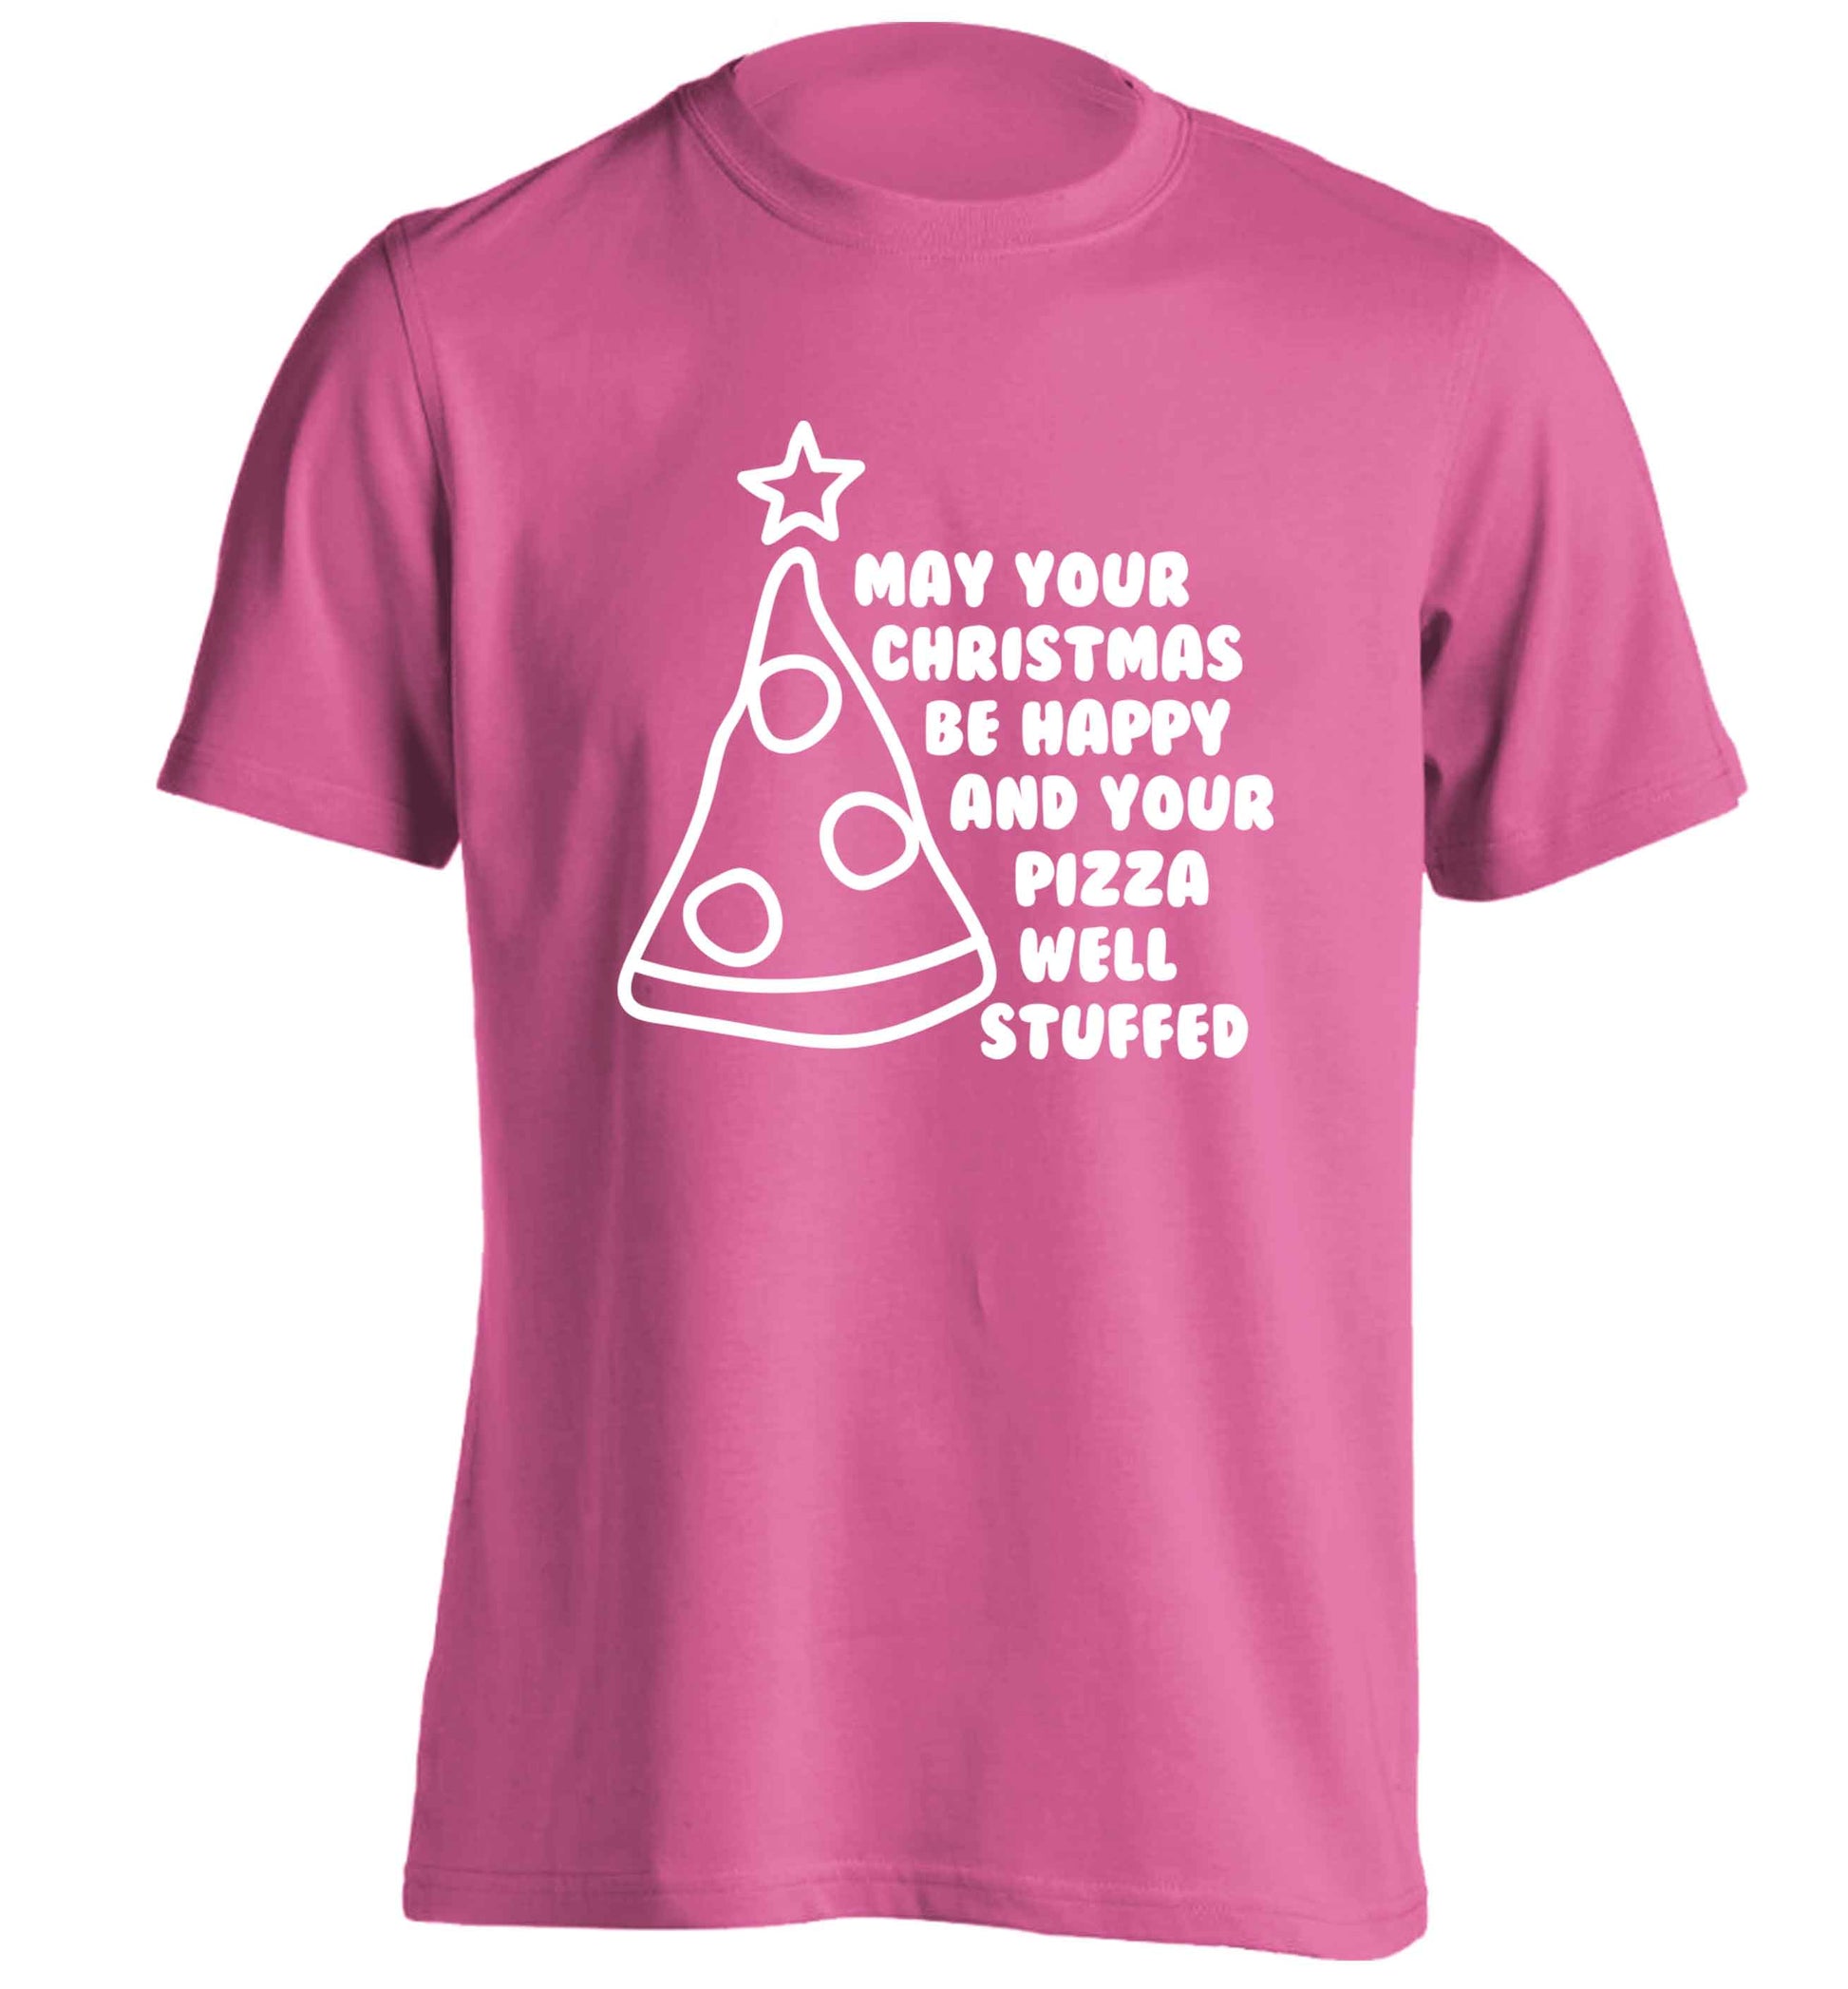 May your Christmas be happy and your pizza well stuffed adults unisex pink Tshirt 2XL